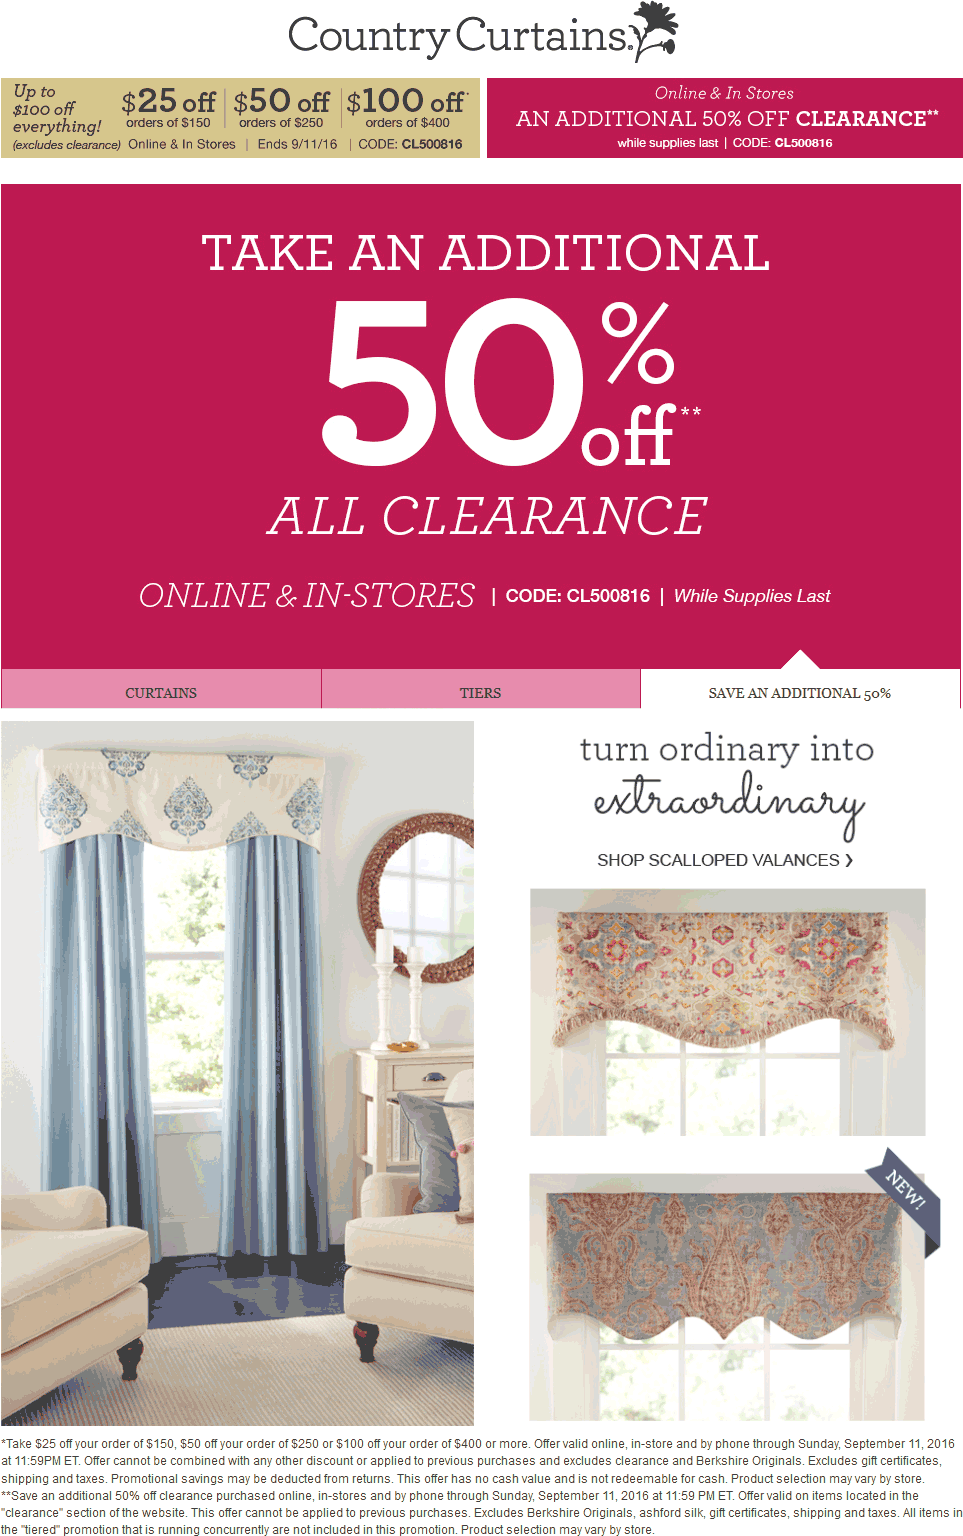 Country Curtains Coupon April 2024 $25 off $150 & more + extra 50% off clearance at Country Curtains, or online via promo code CL500816